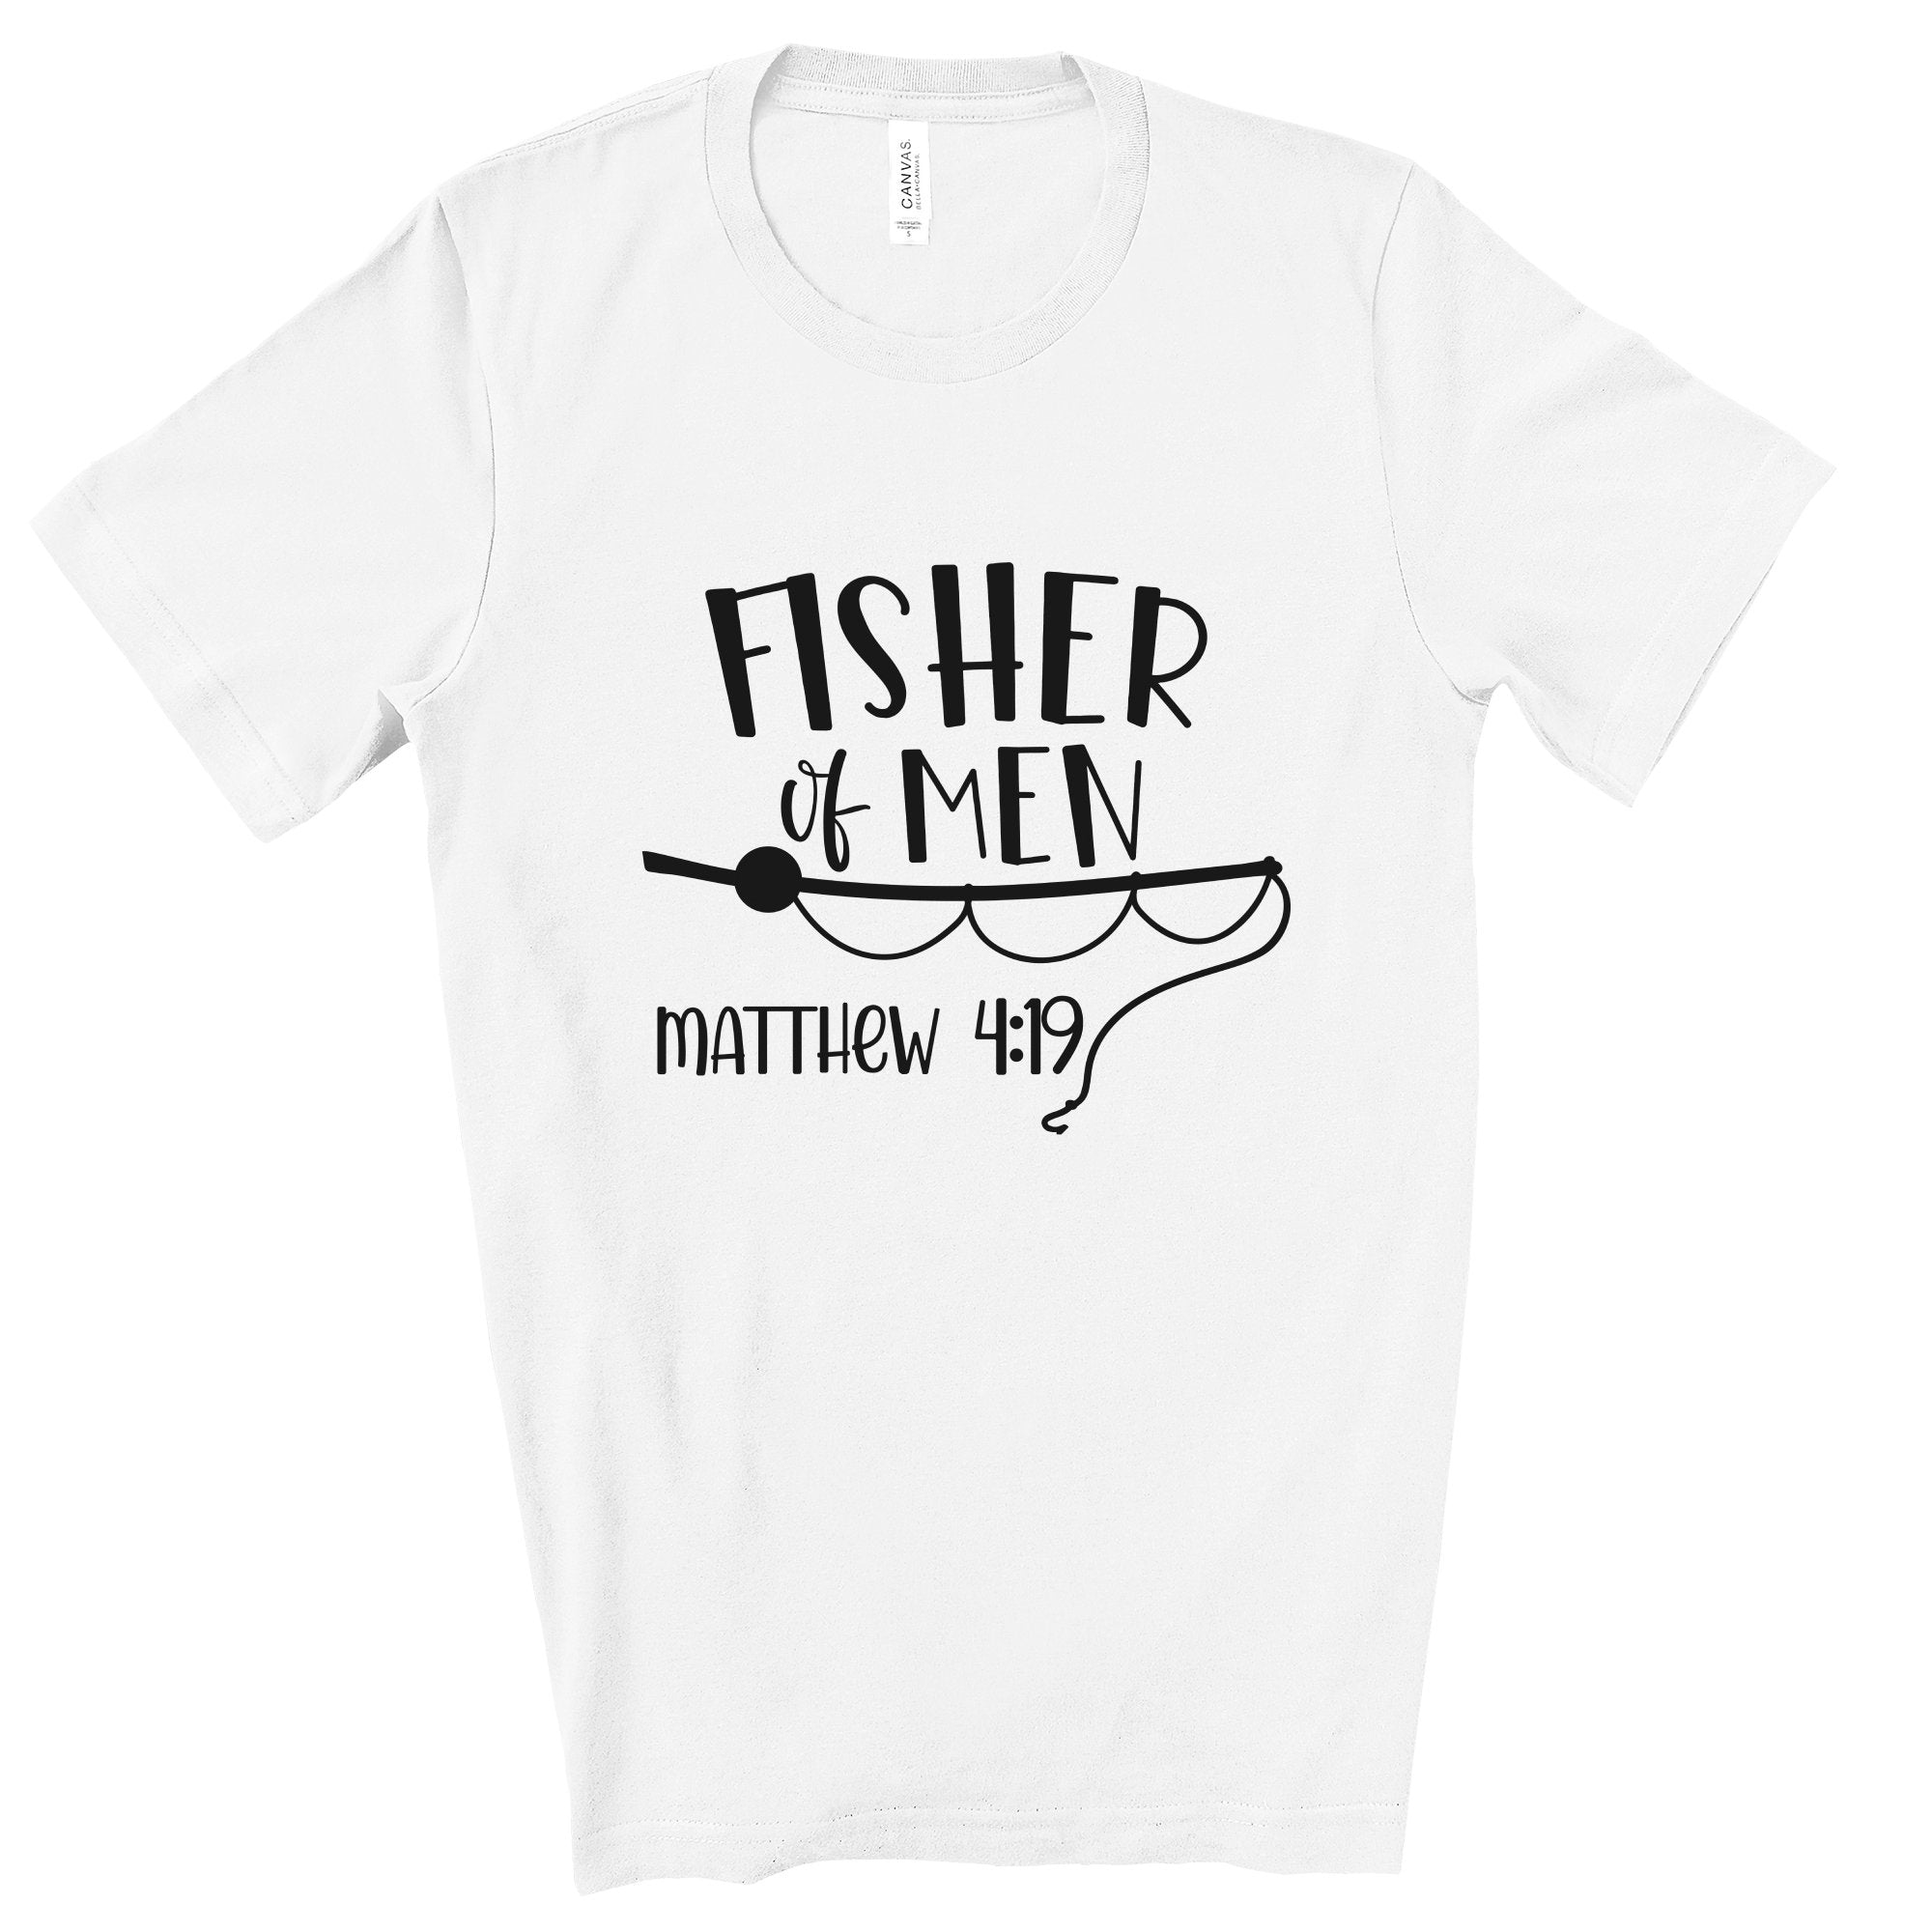 Fisher of Men Men's Jersey Short Sleeve Tee Size: XS Color: White Jesus Passion Apparel